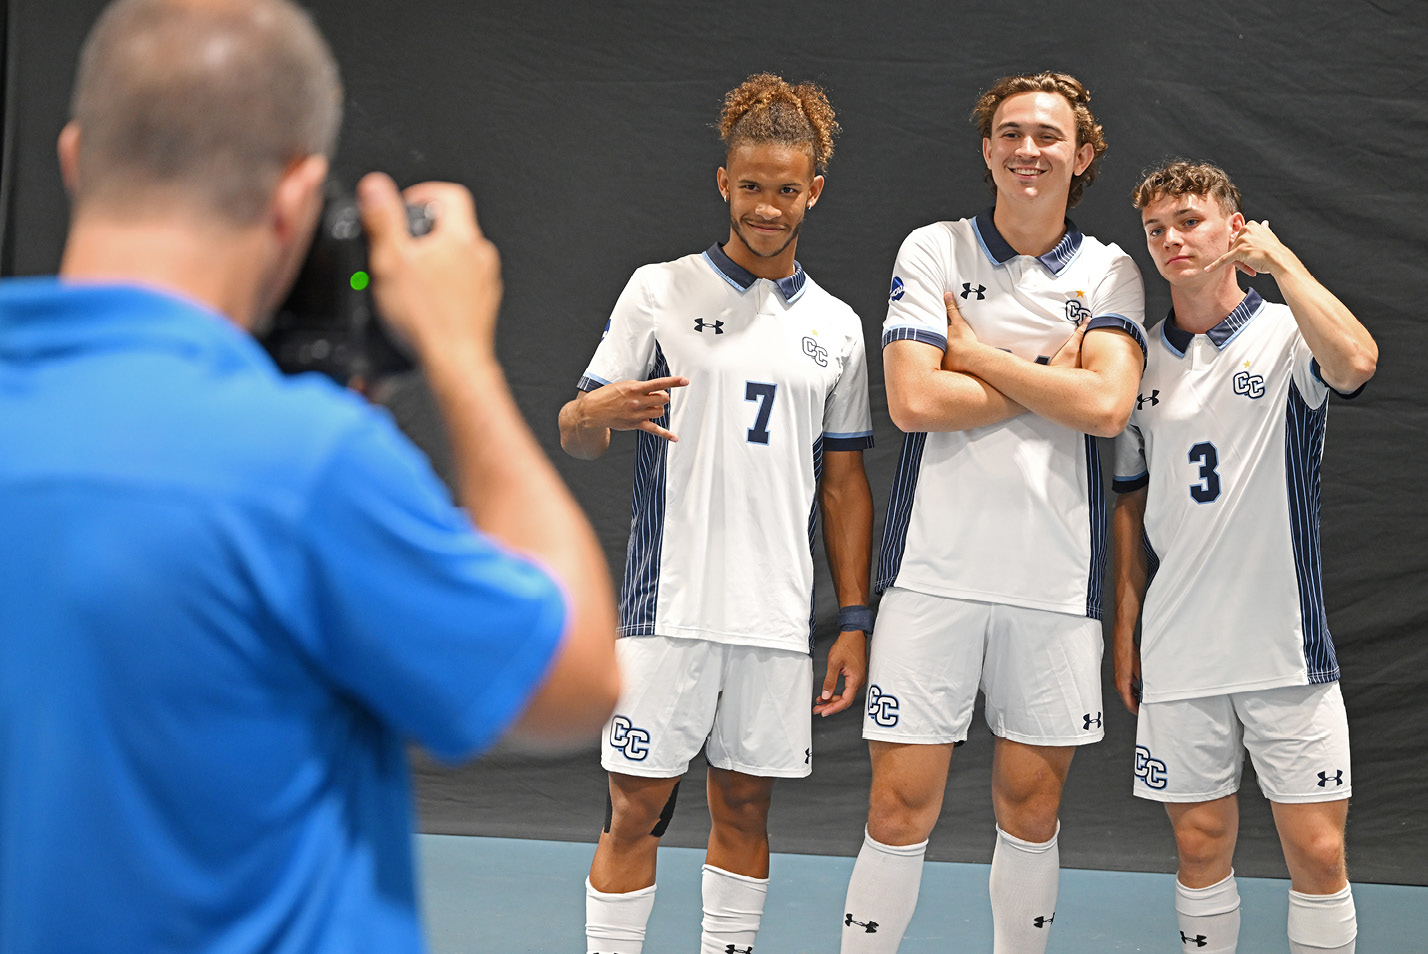 Members of the men's soccer team pose for a photo at Media Day.